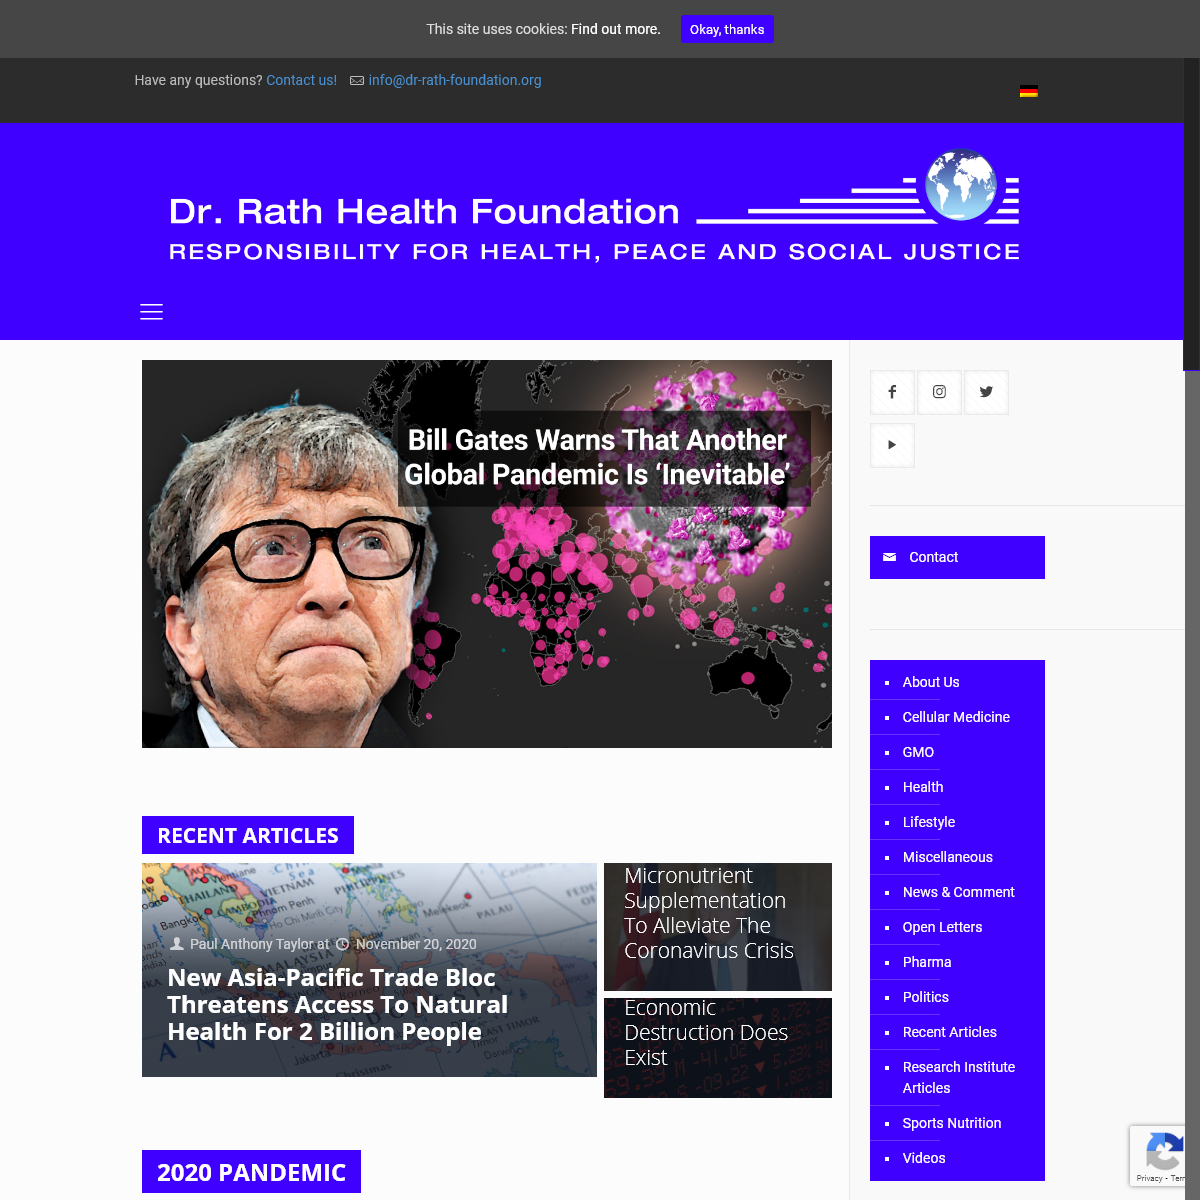 Dr. Rath Health Foundation â€“ Responsibility for Health, Peace and Social Justice